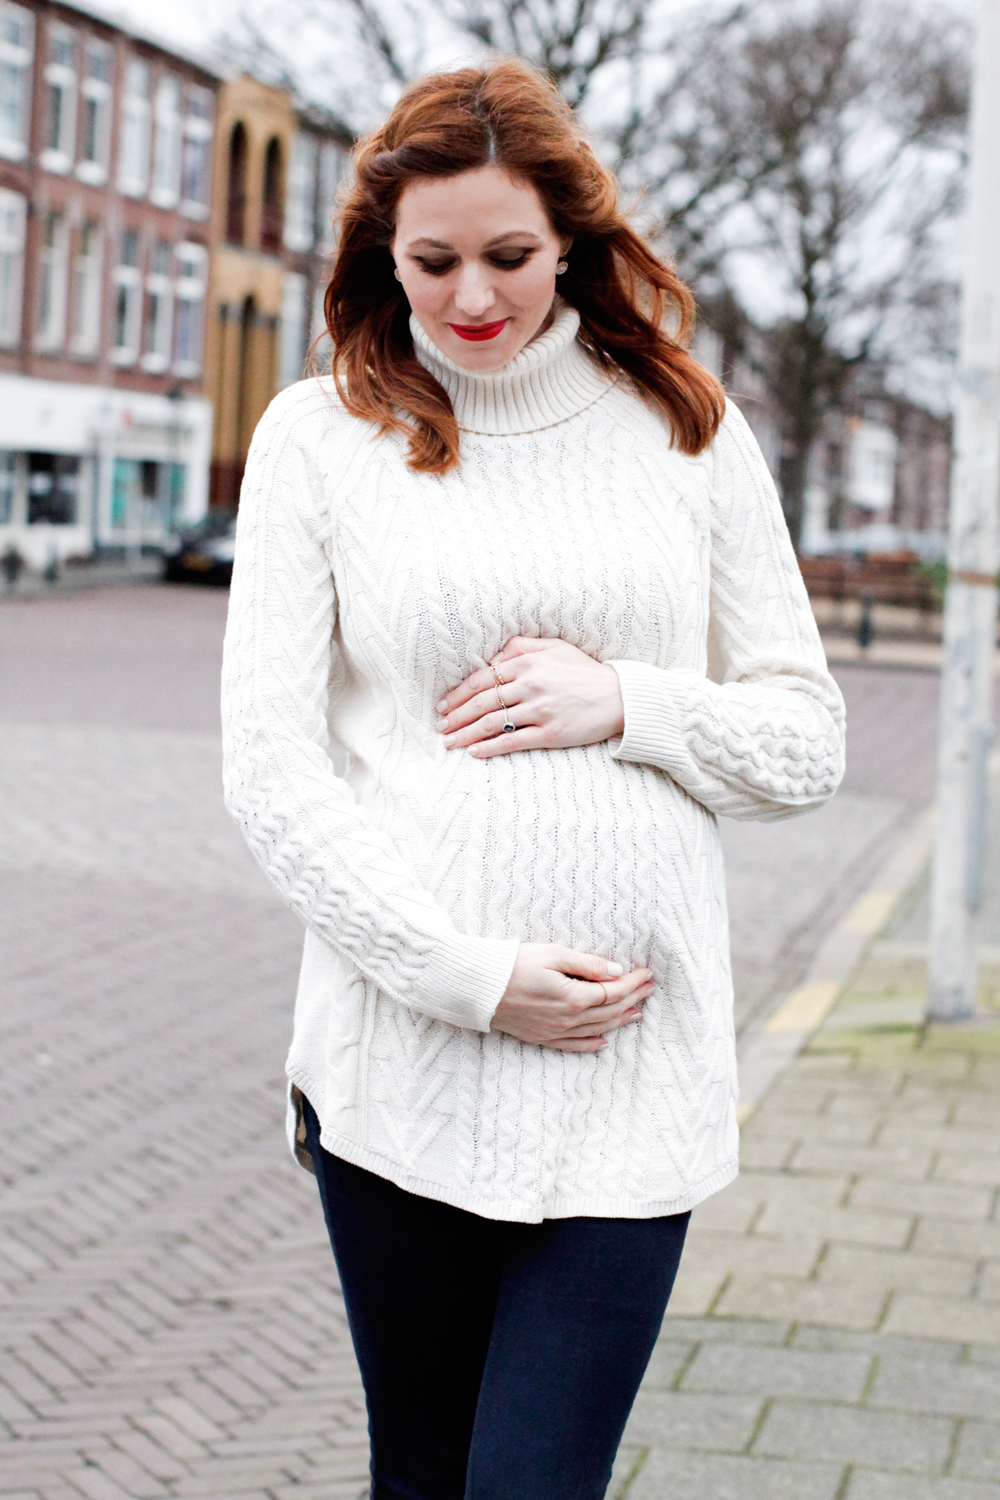 Look Back at My Second Trimester